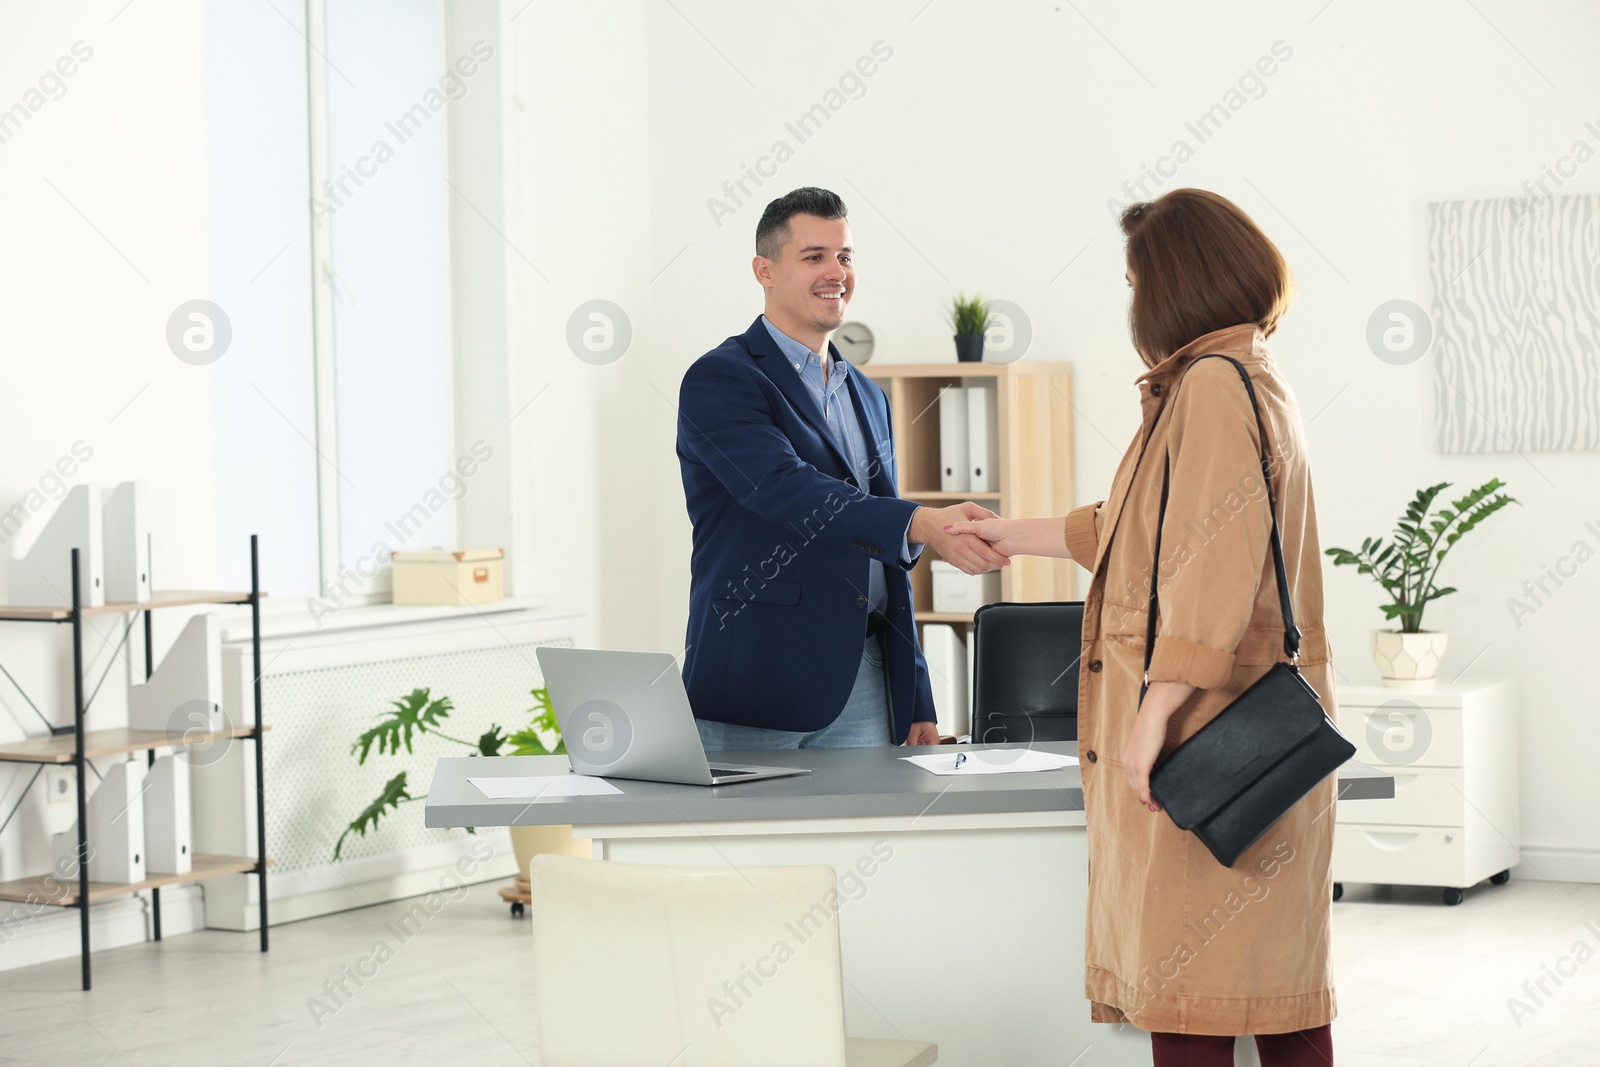 Photo of Human resources manager shaking hands with applicant after job interview in office